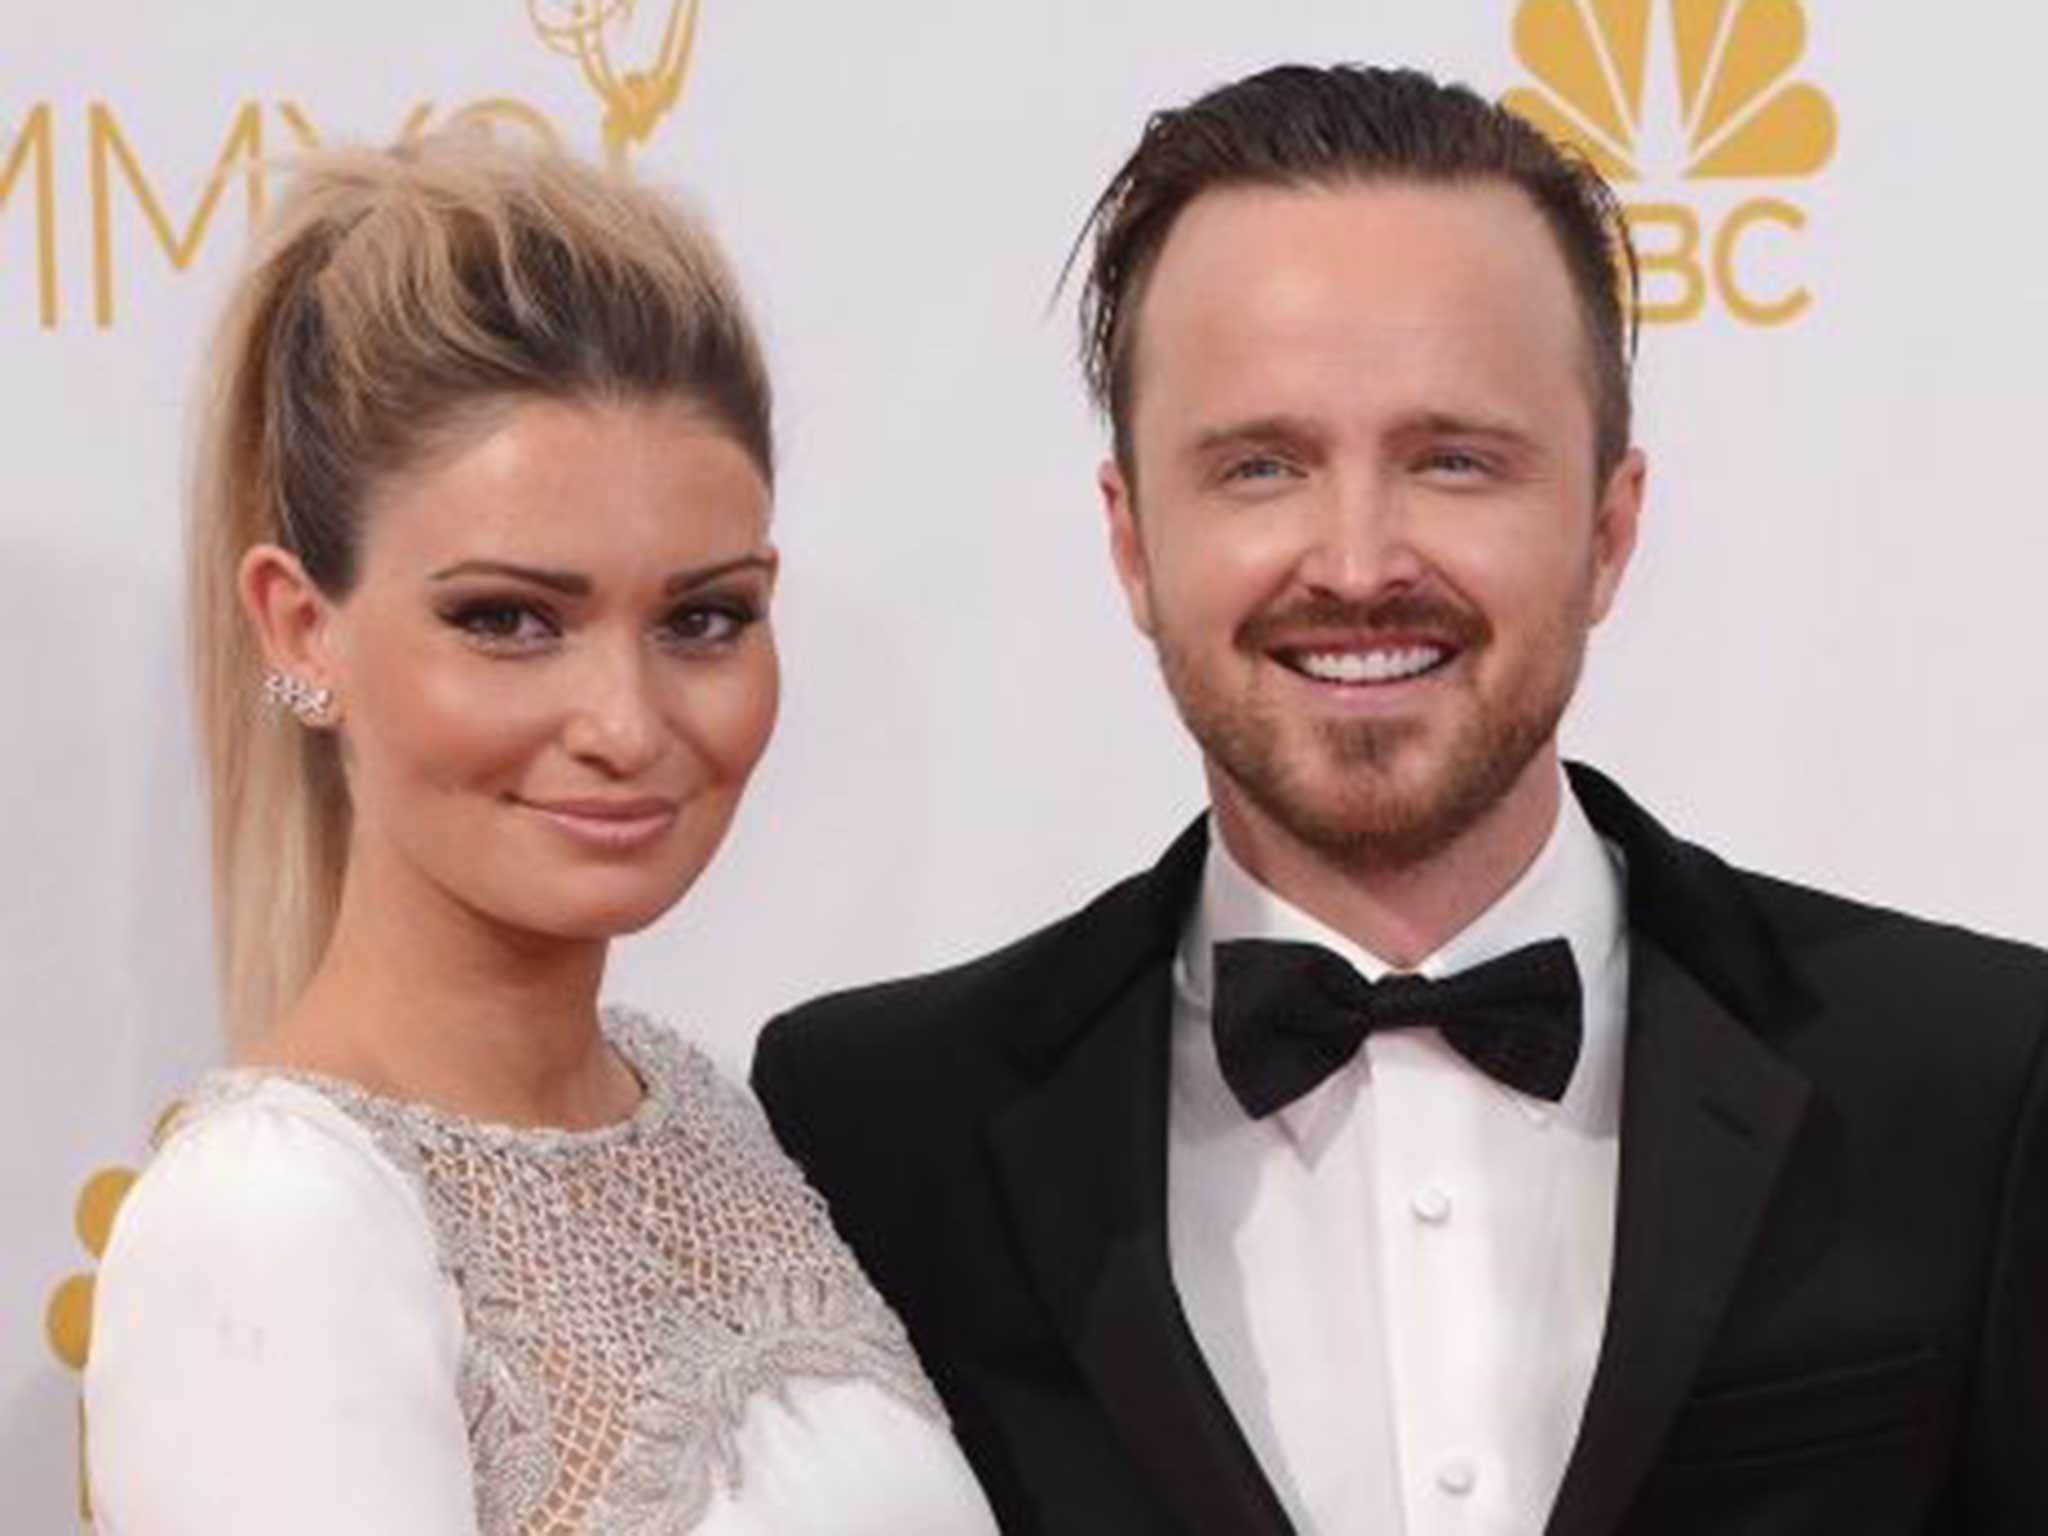 Lauren Paul with husband Aaron Paul at the Emmy's last night